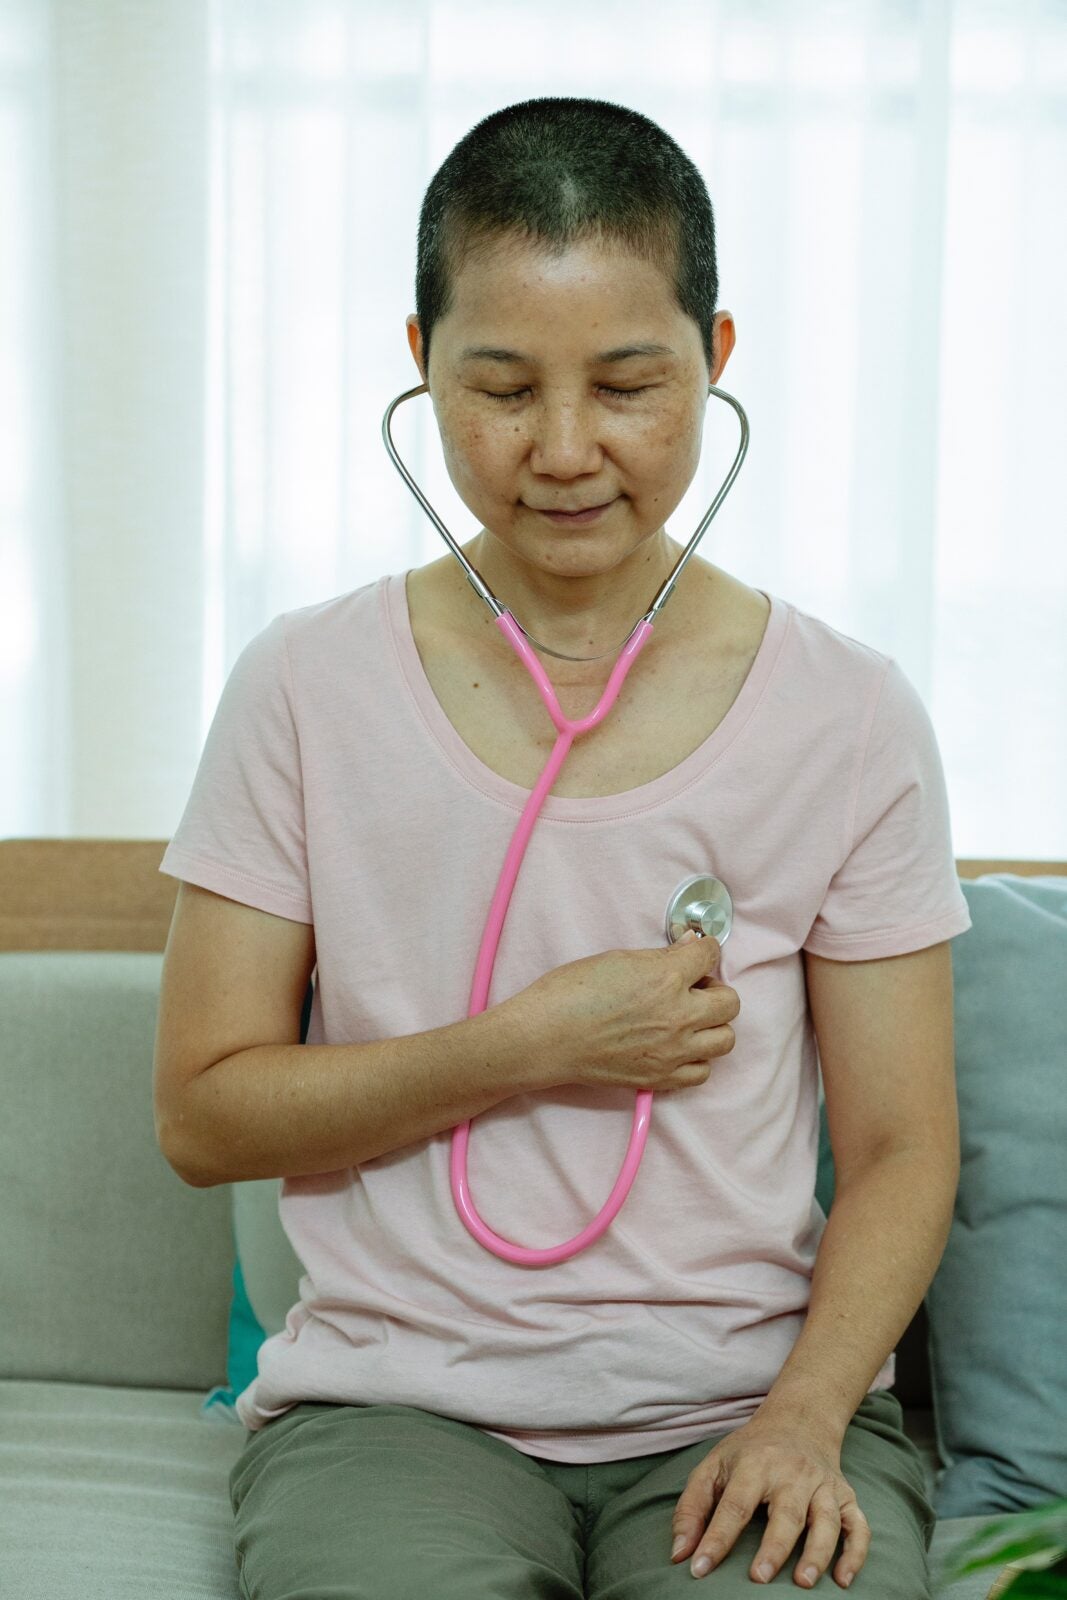 A bald Asian woman holding a stethoscope to her own chest.